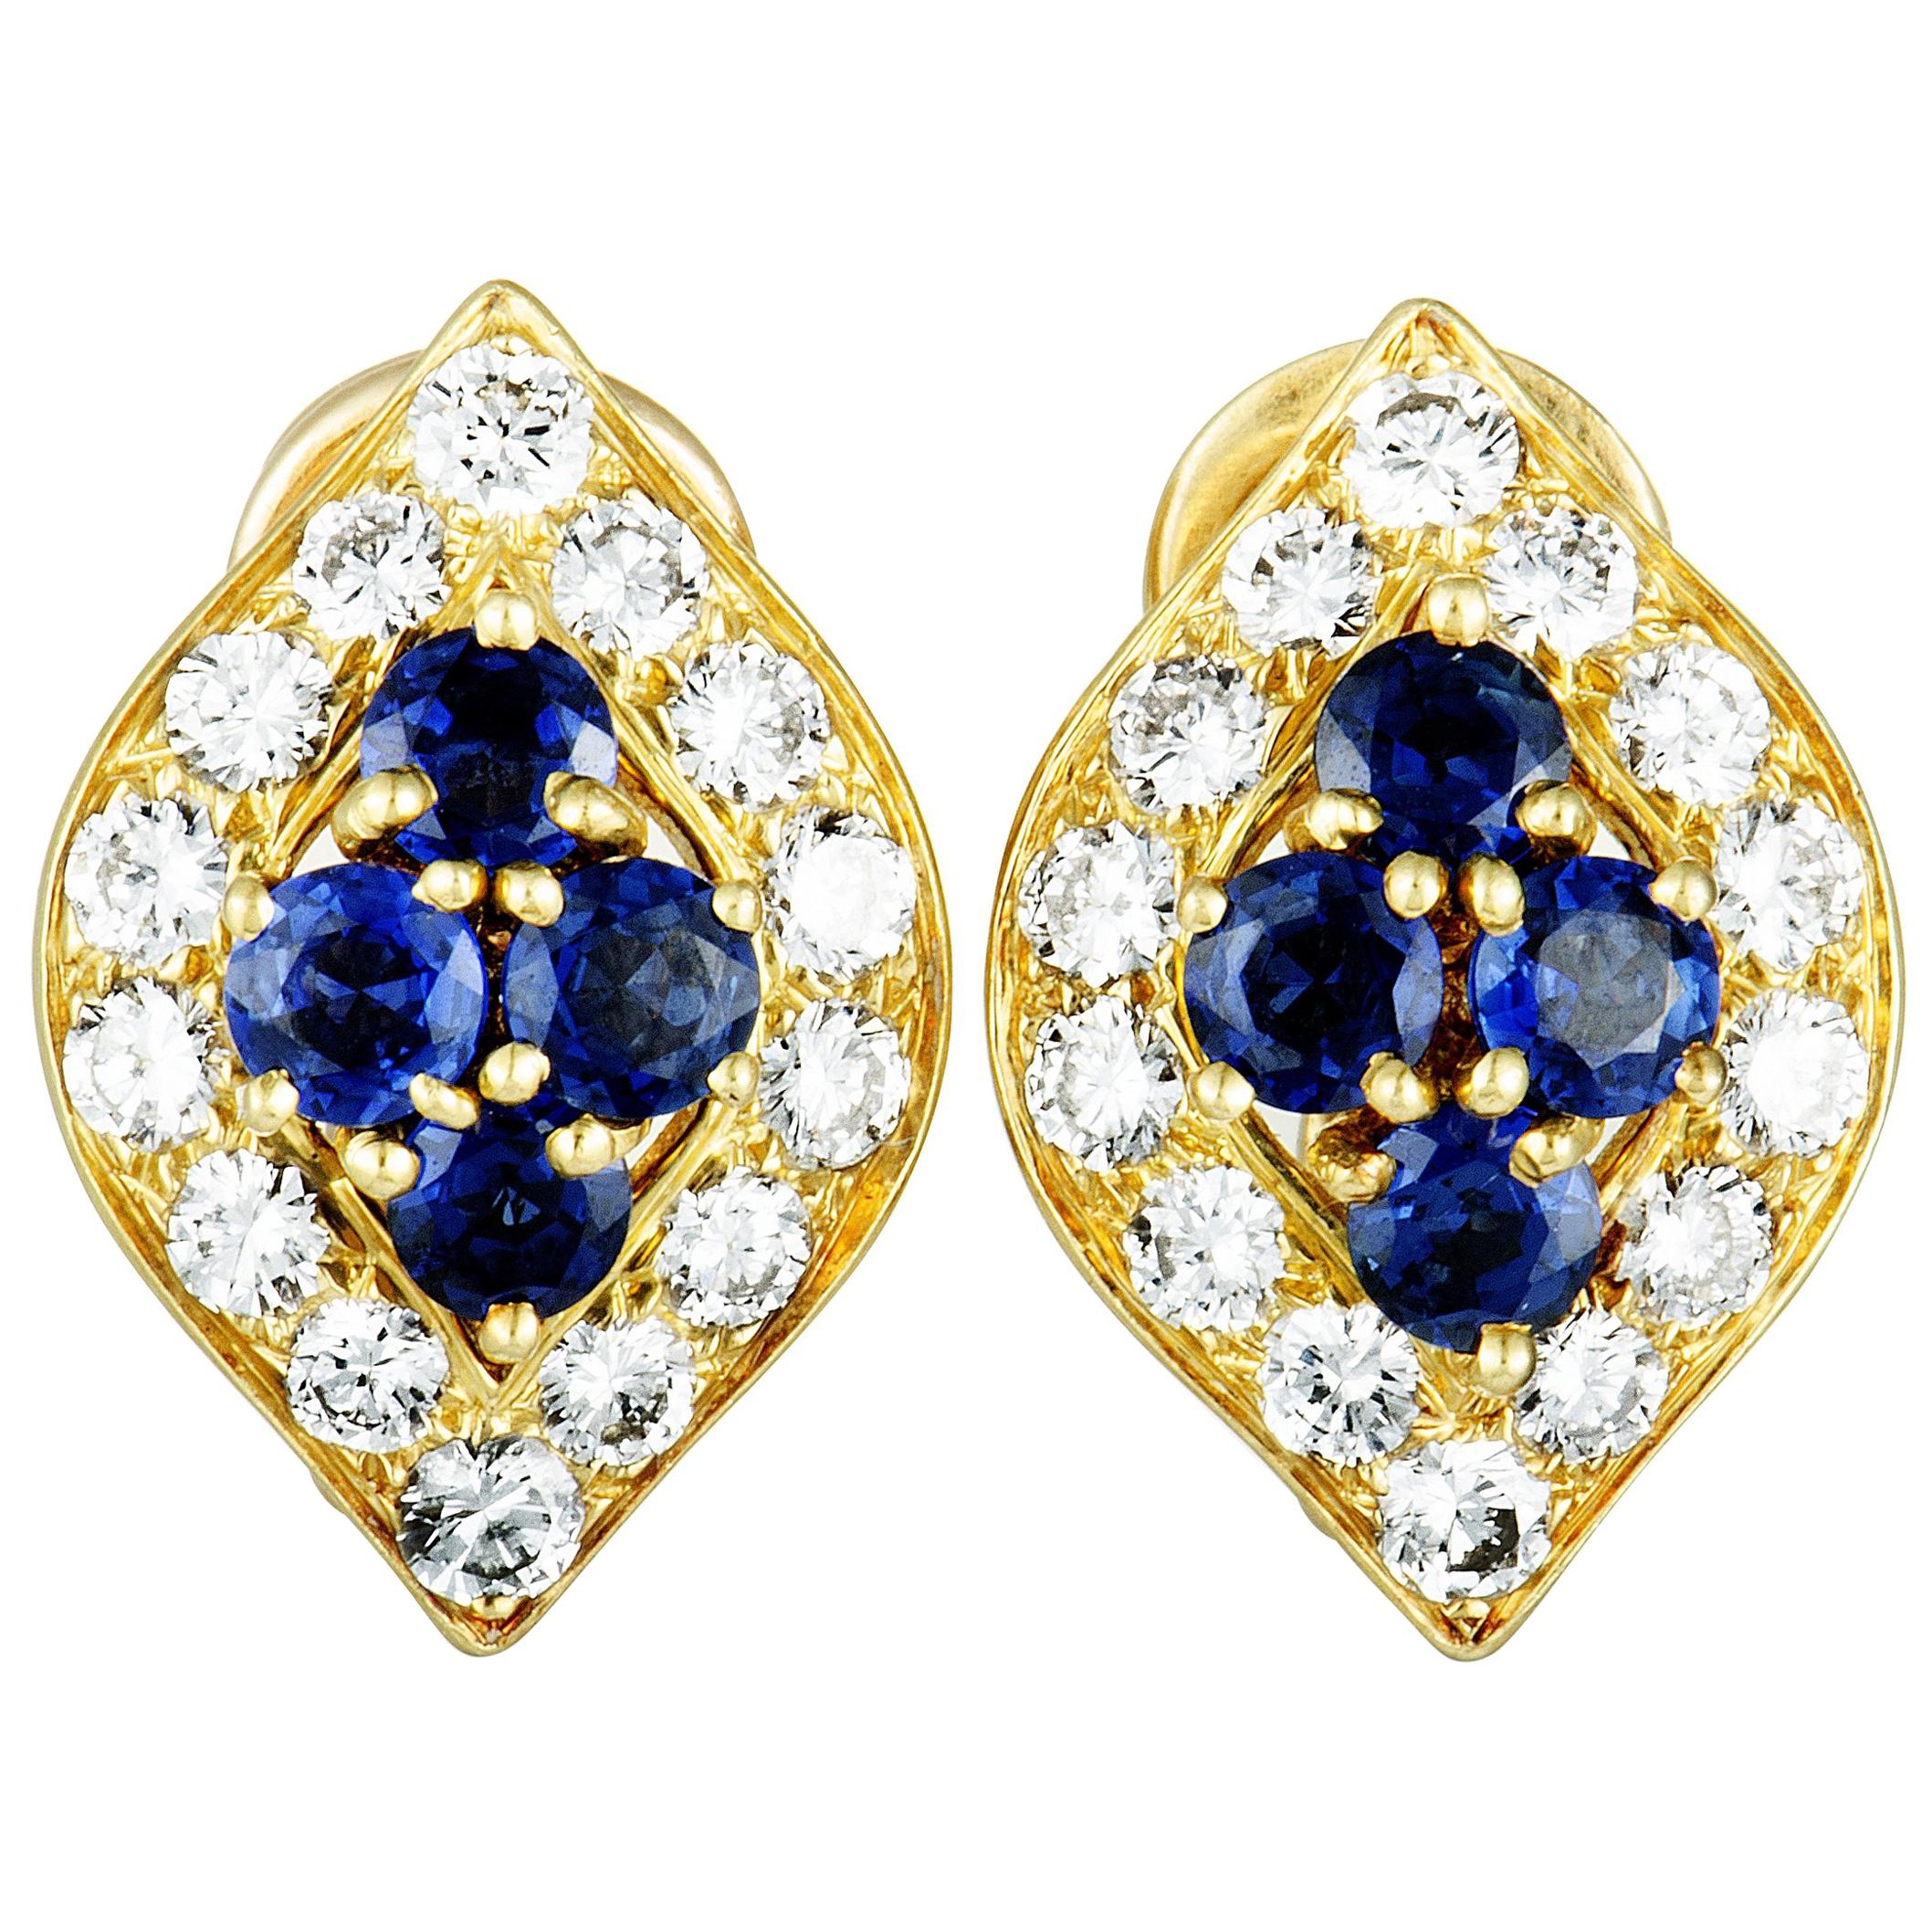 Van Cleef & Arpels Vintage Diamond and Sapphire Yellow Gold Clip-On Earrings